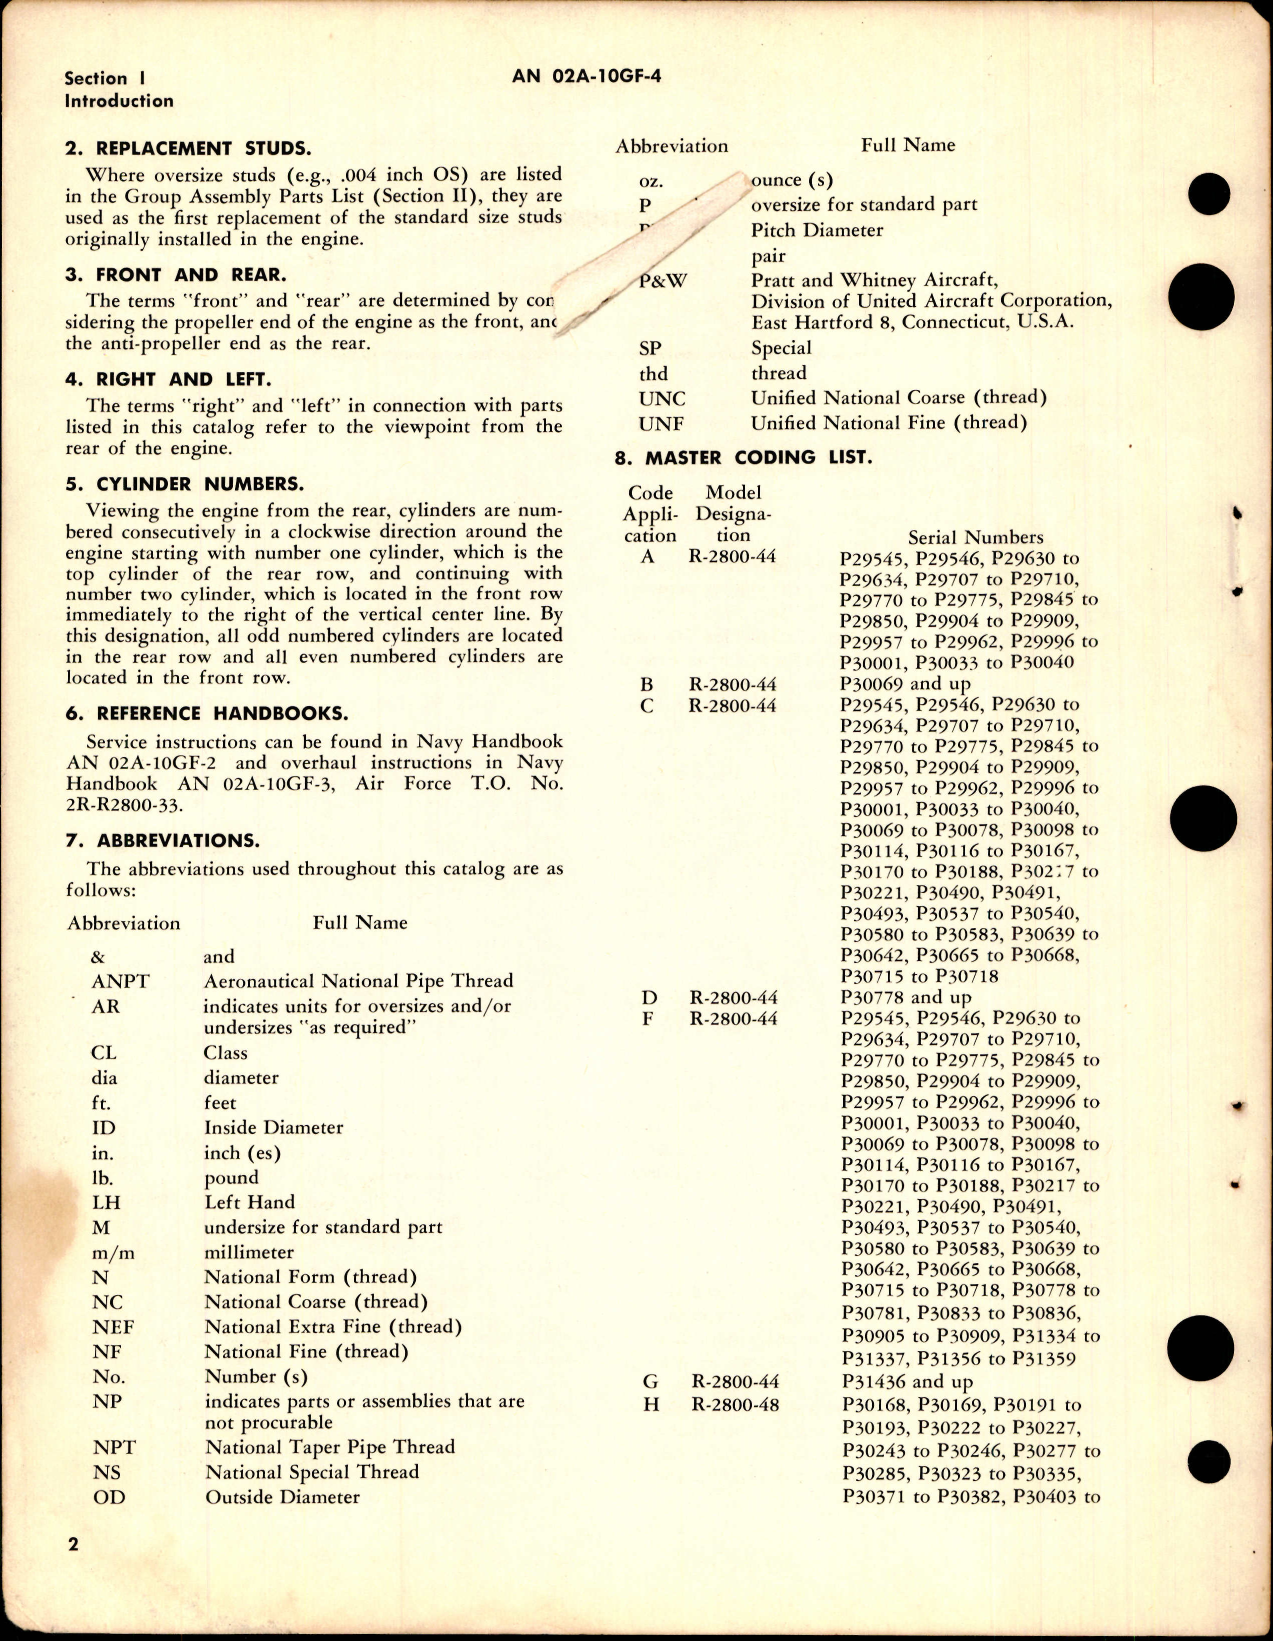 Sample page 6 from AirCorps Library document: Parts Catalog for Models R-2800-44, -48 and -97